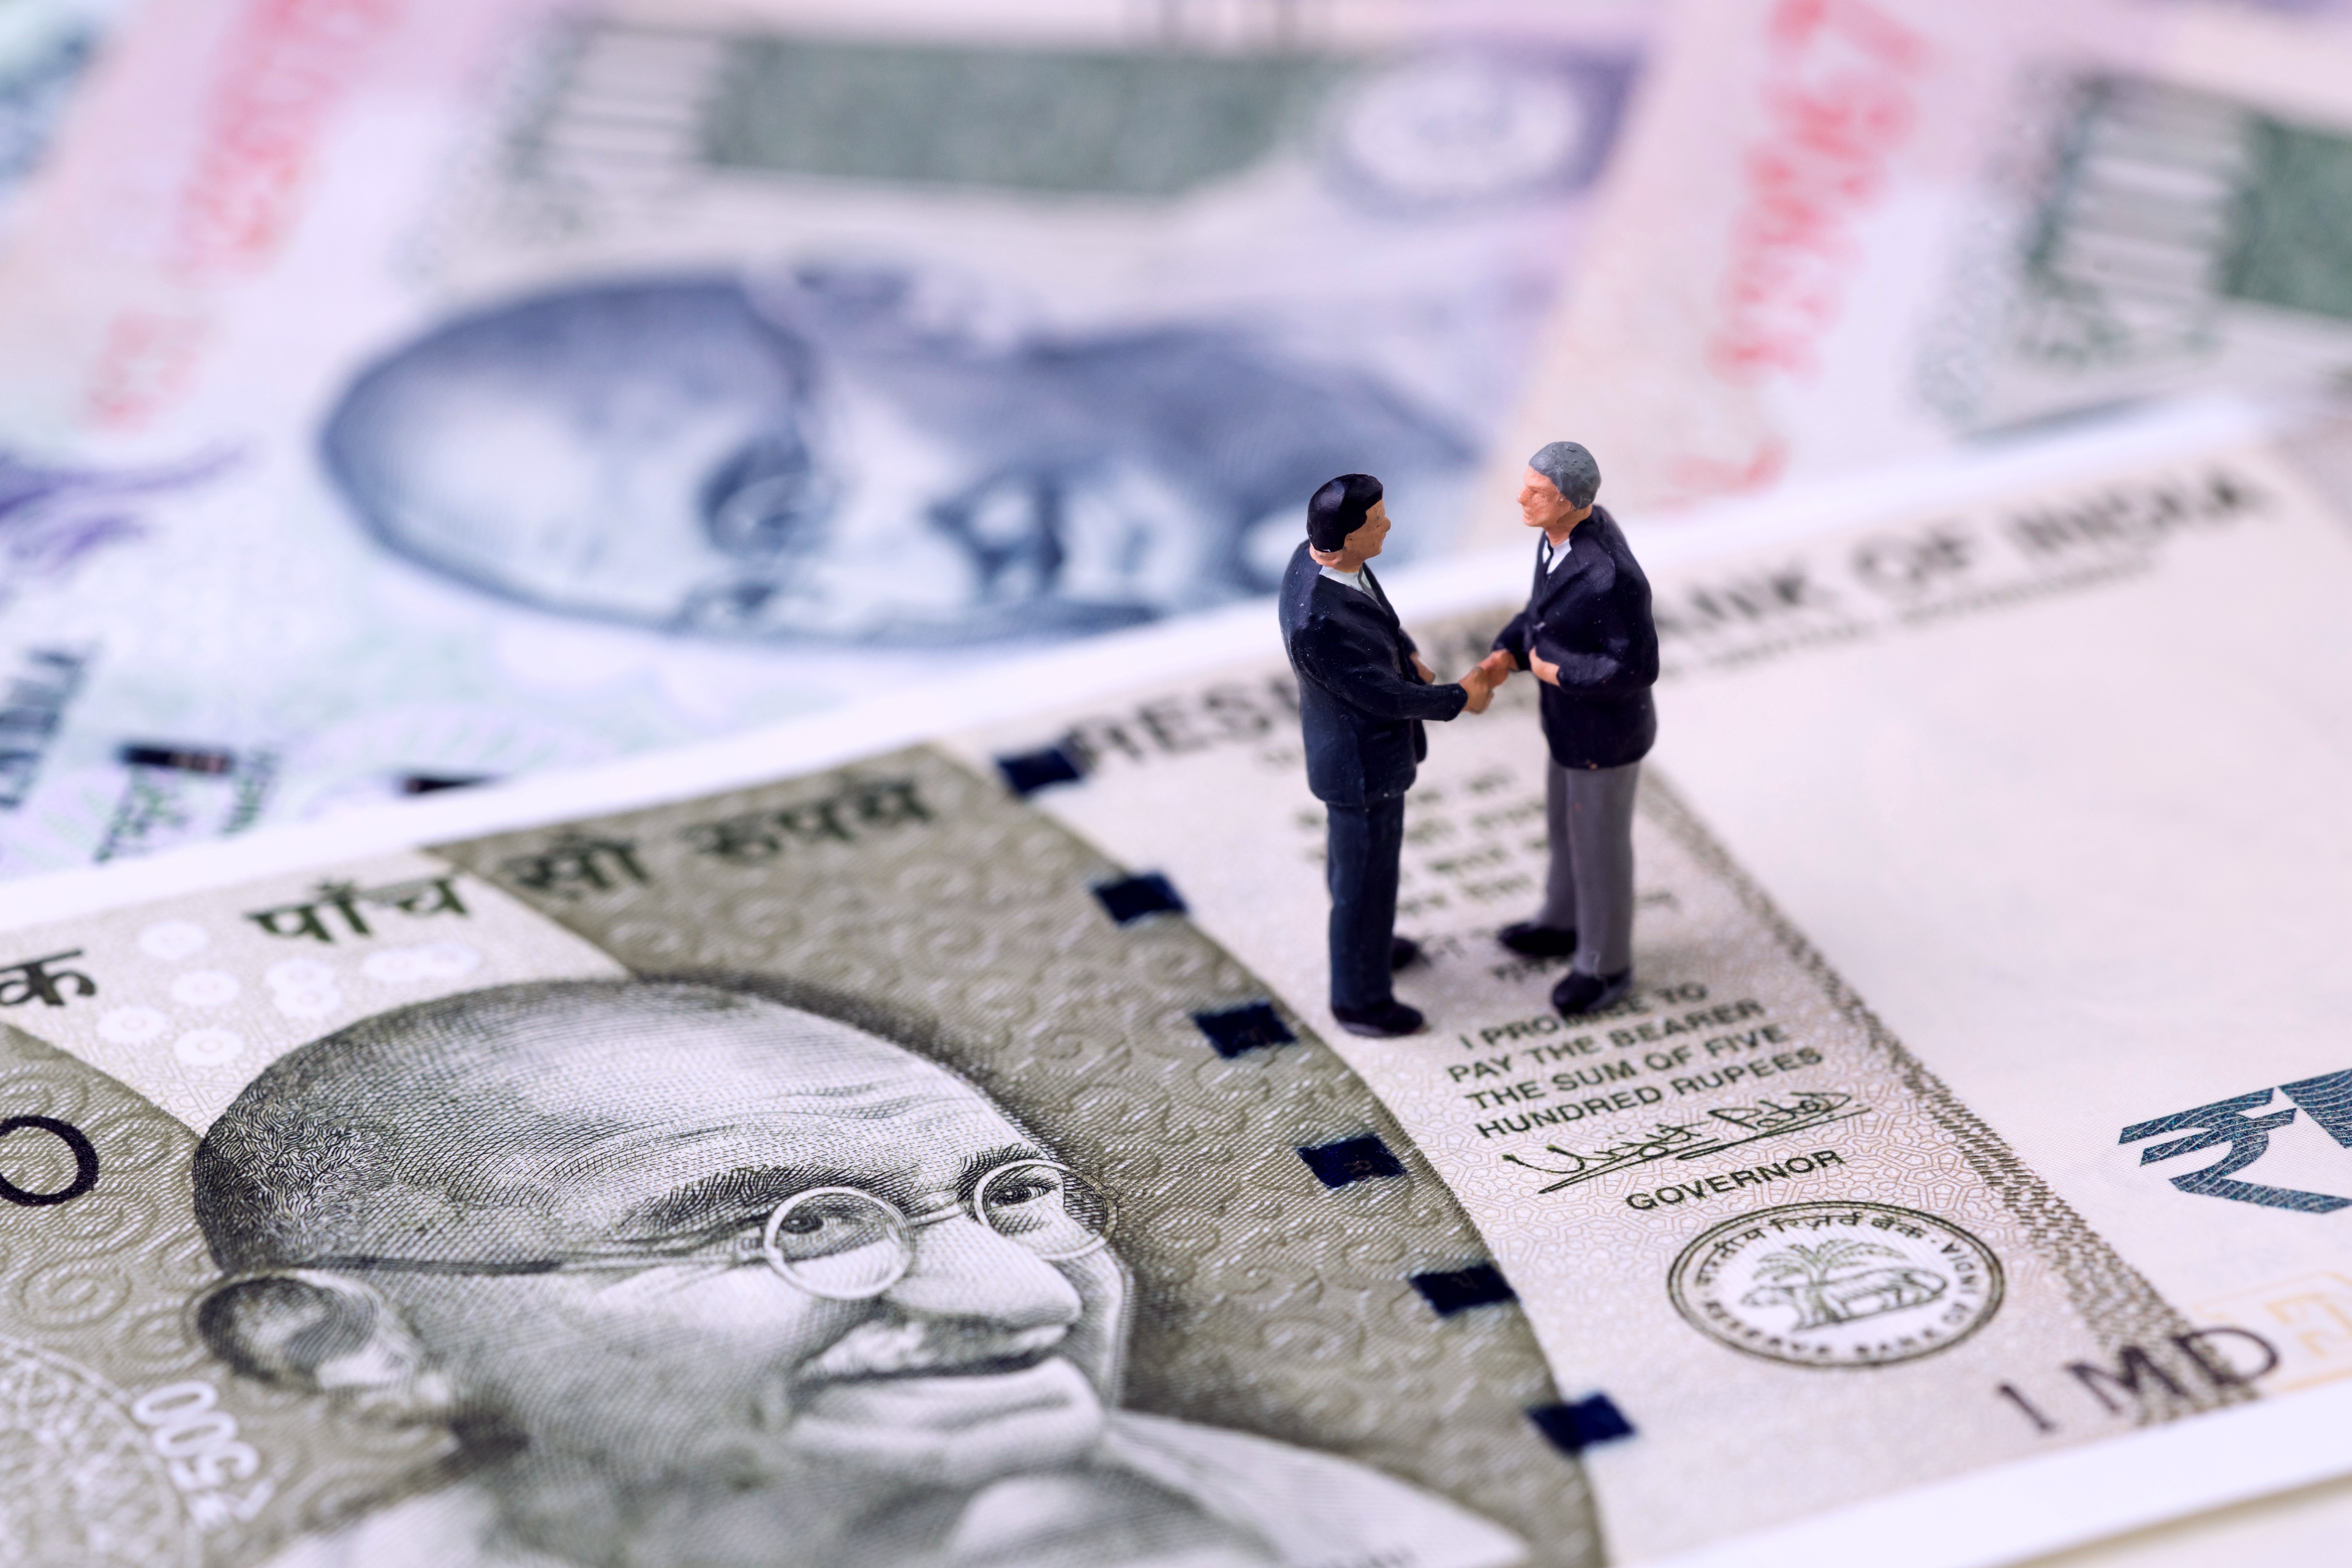 Internationalization of INR: Indian rupee gaining global recognition